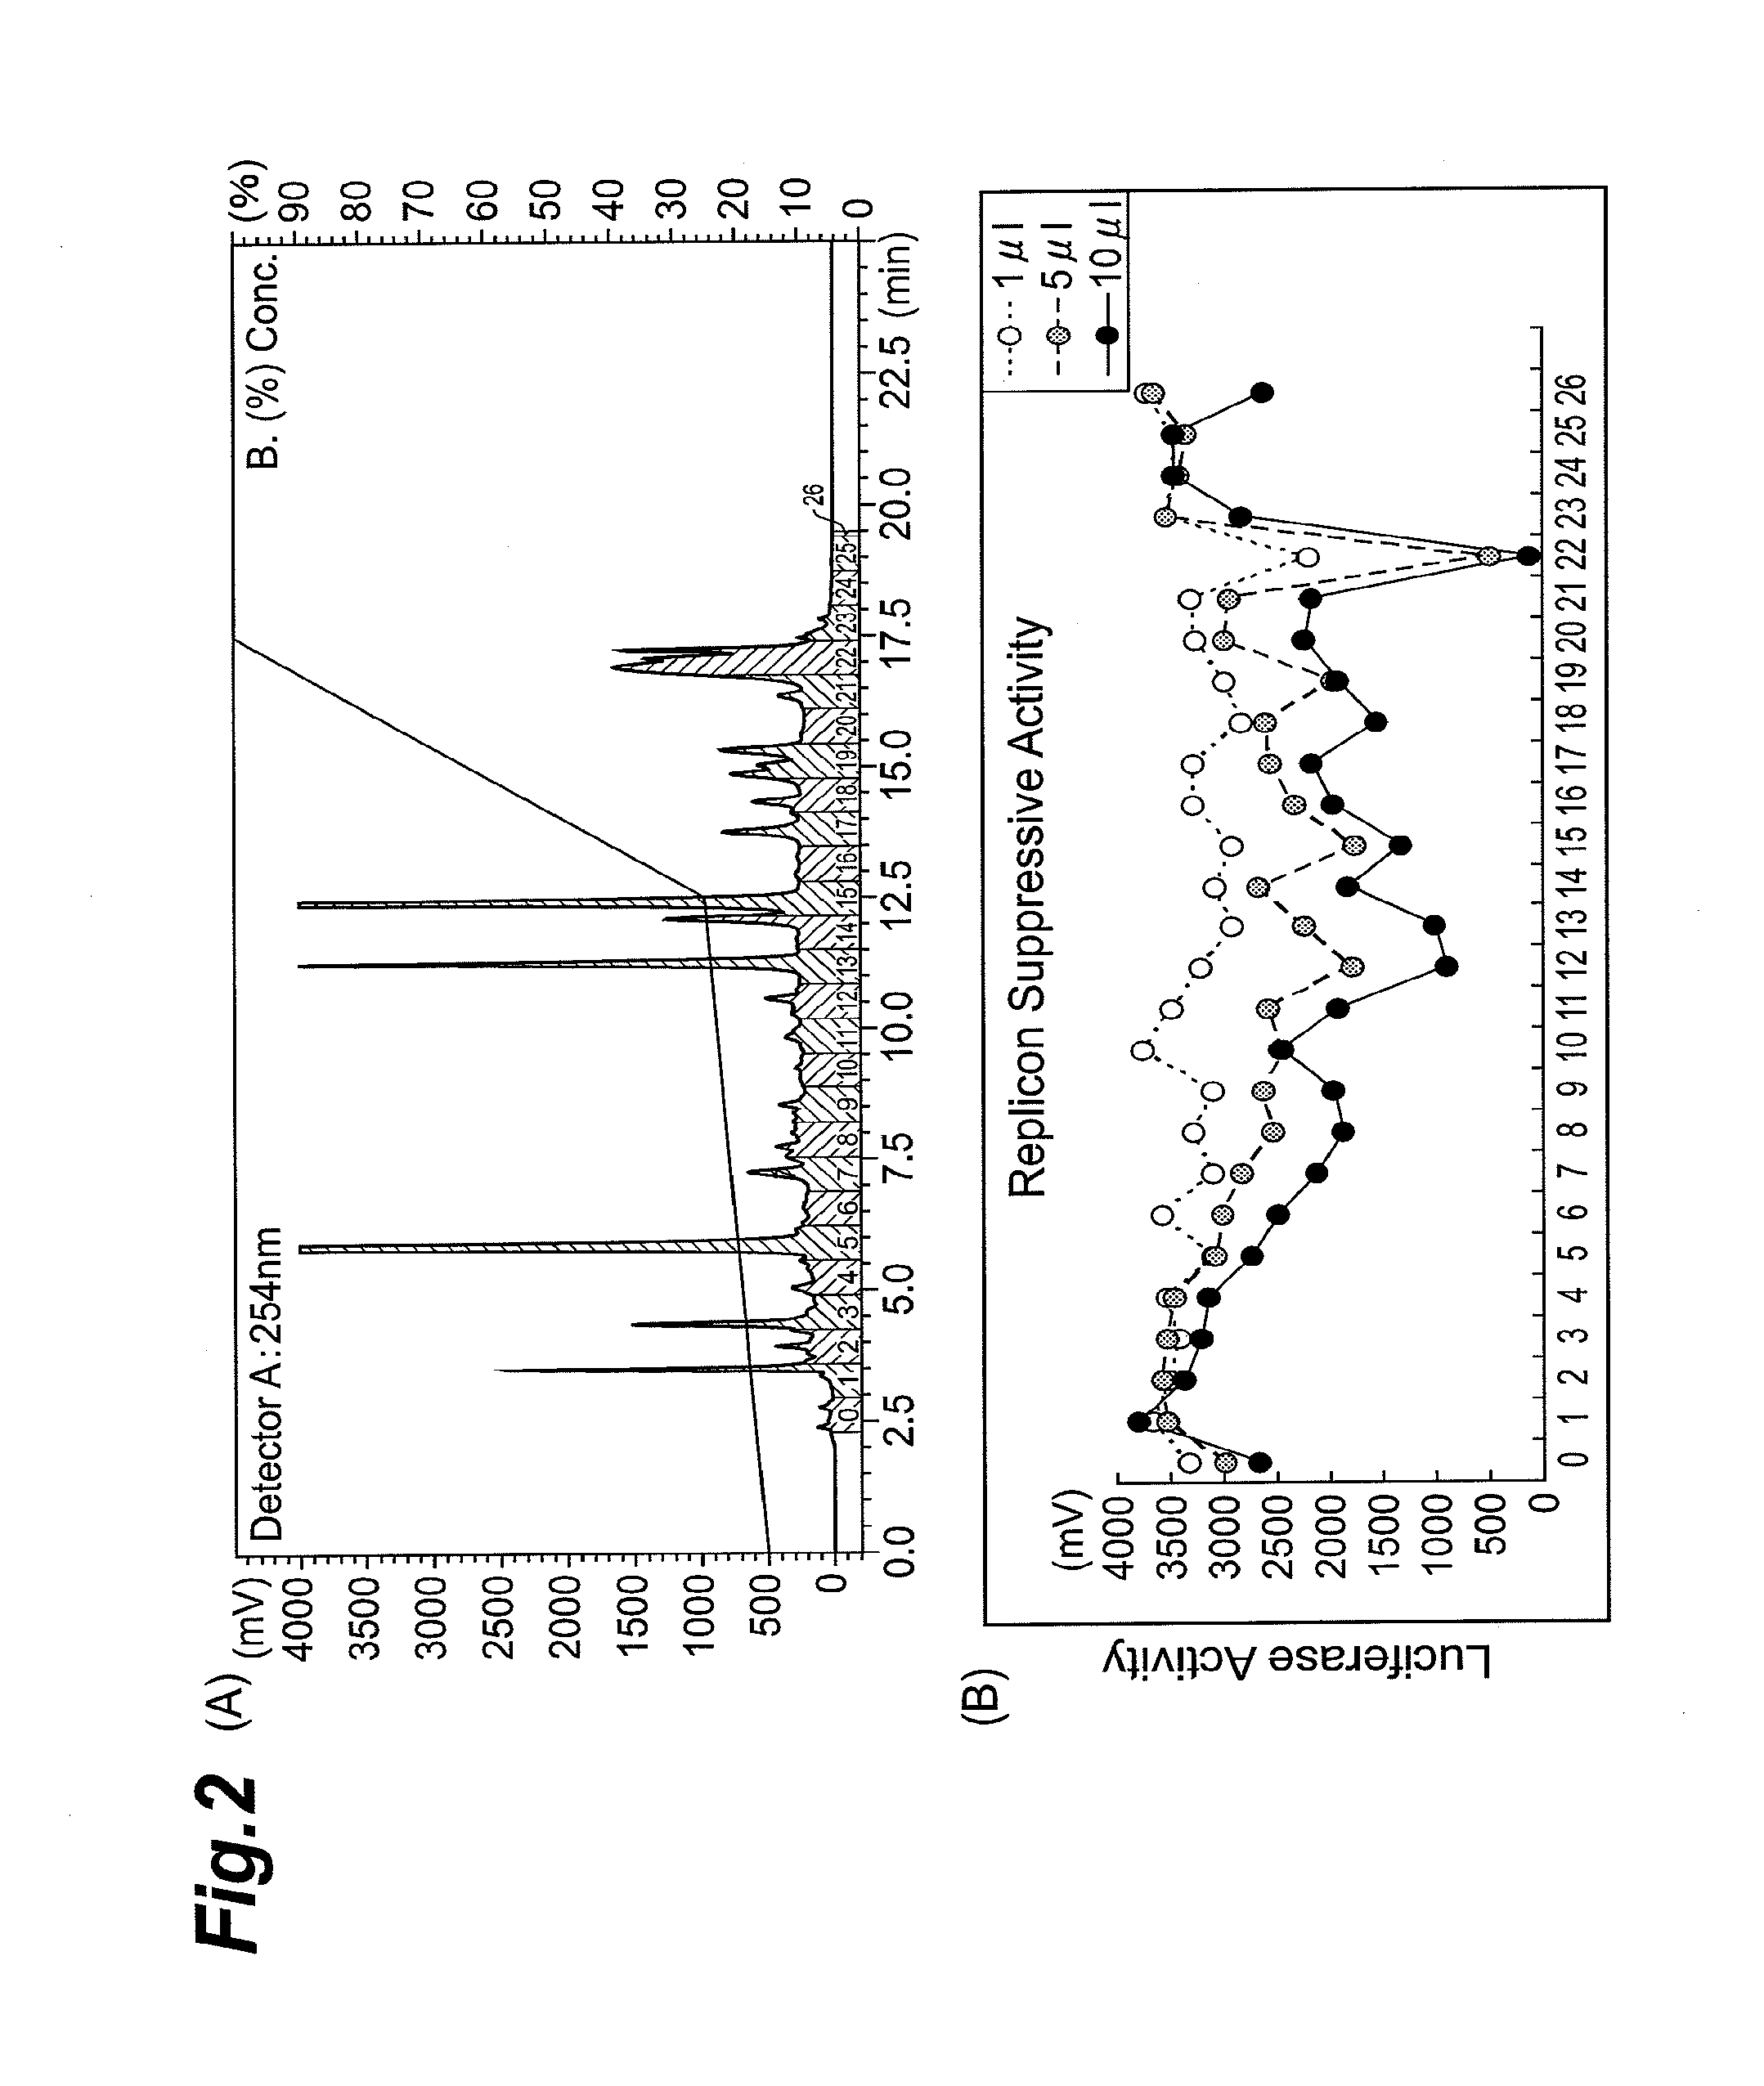 Agent for inhibiting production of hepatitis c virus and its use